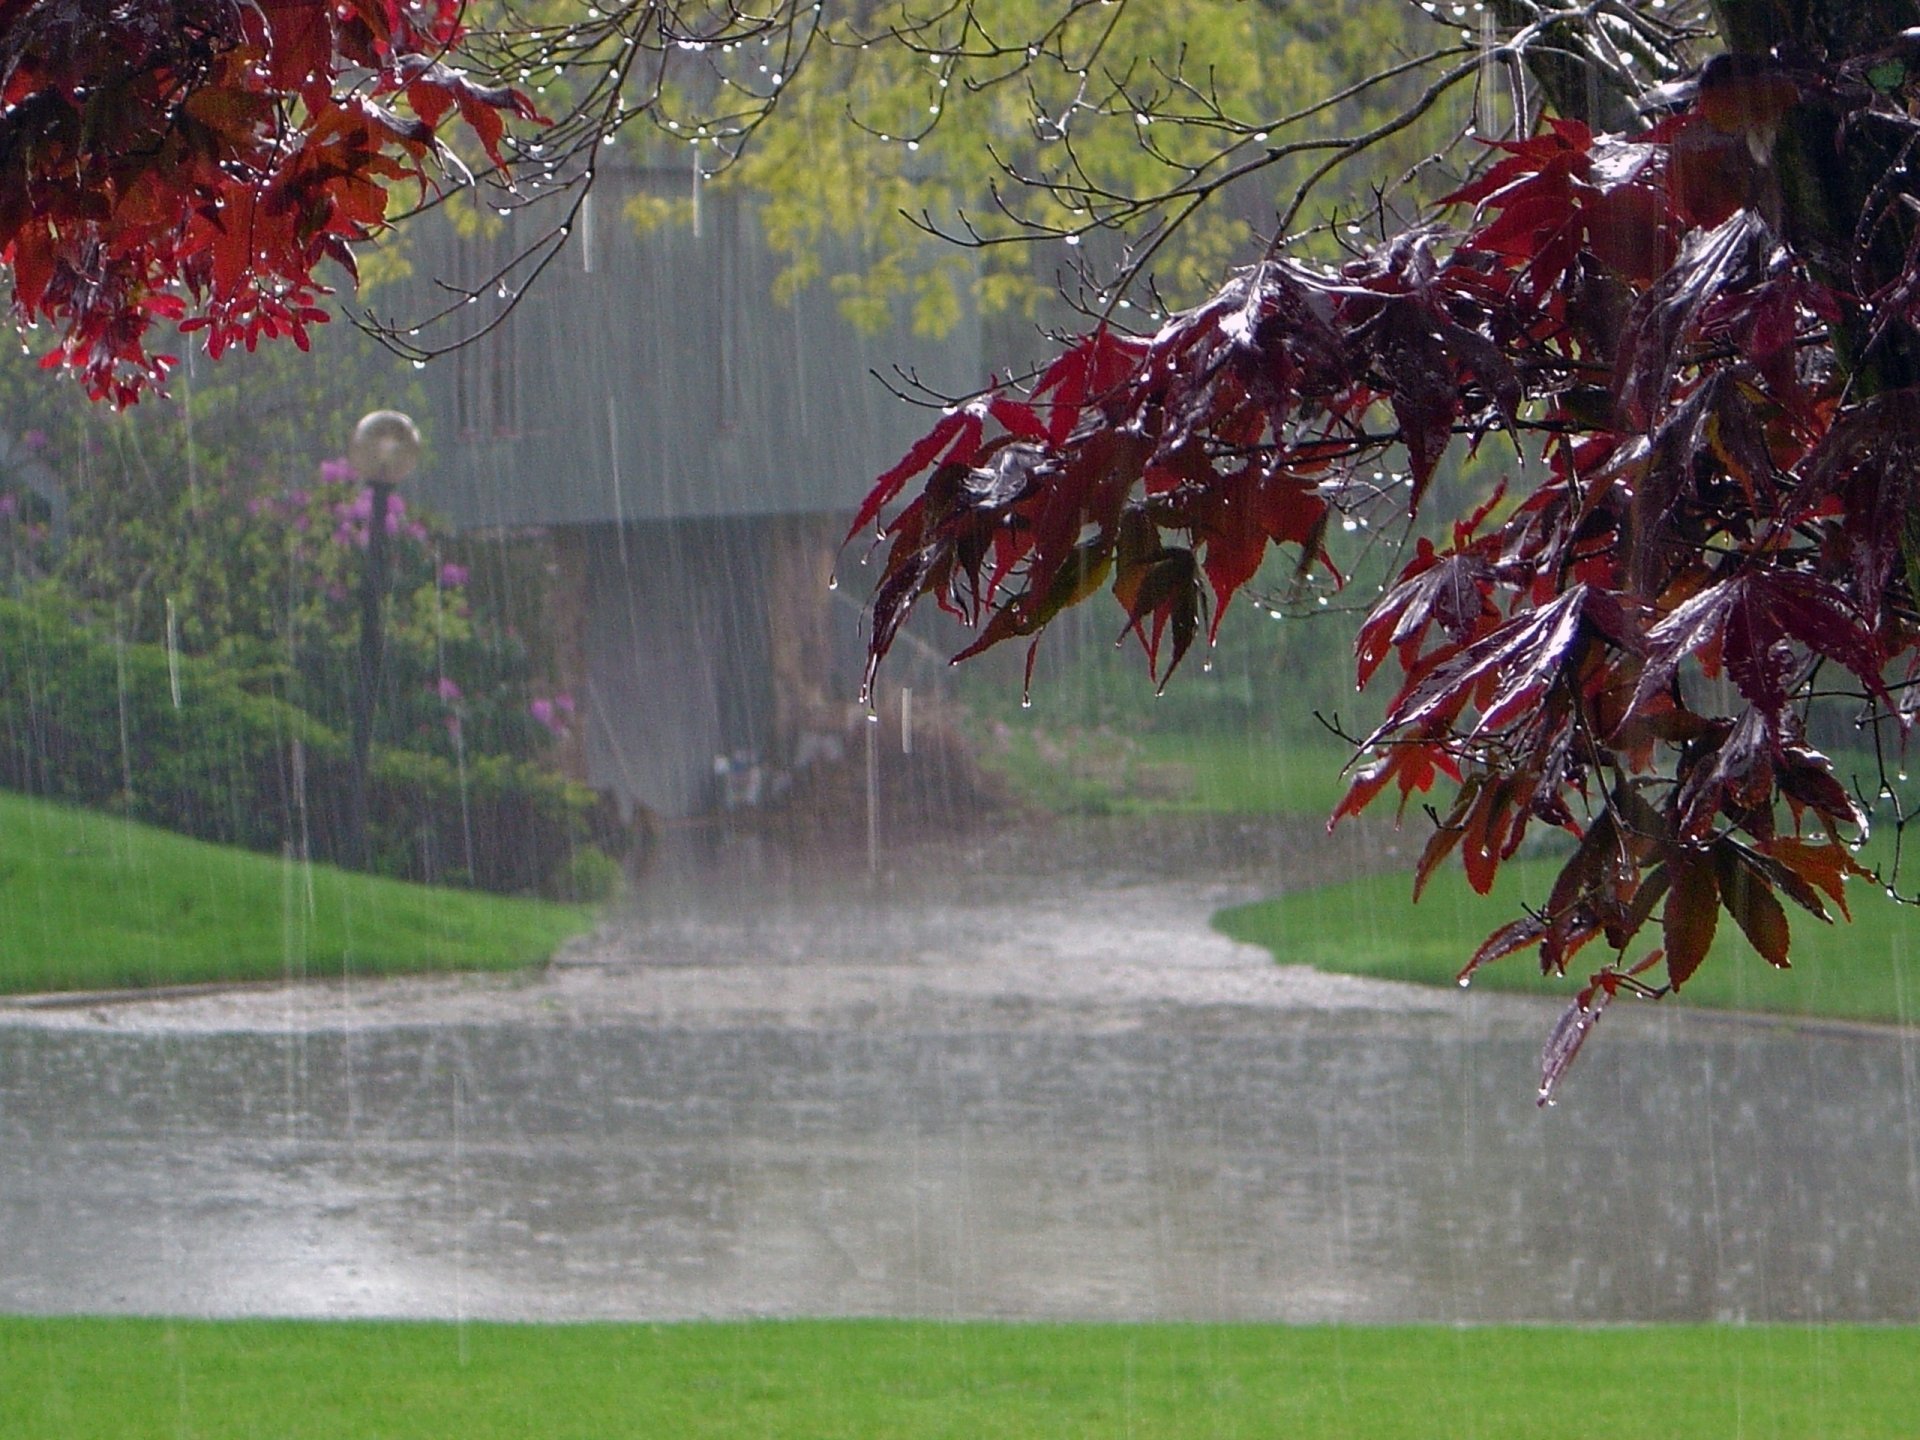 Rainy Day Images Free Download - HD Wallpaper 